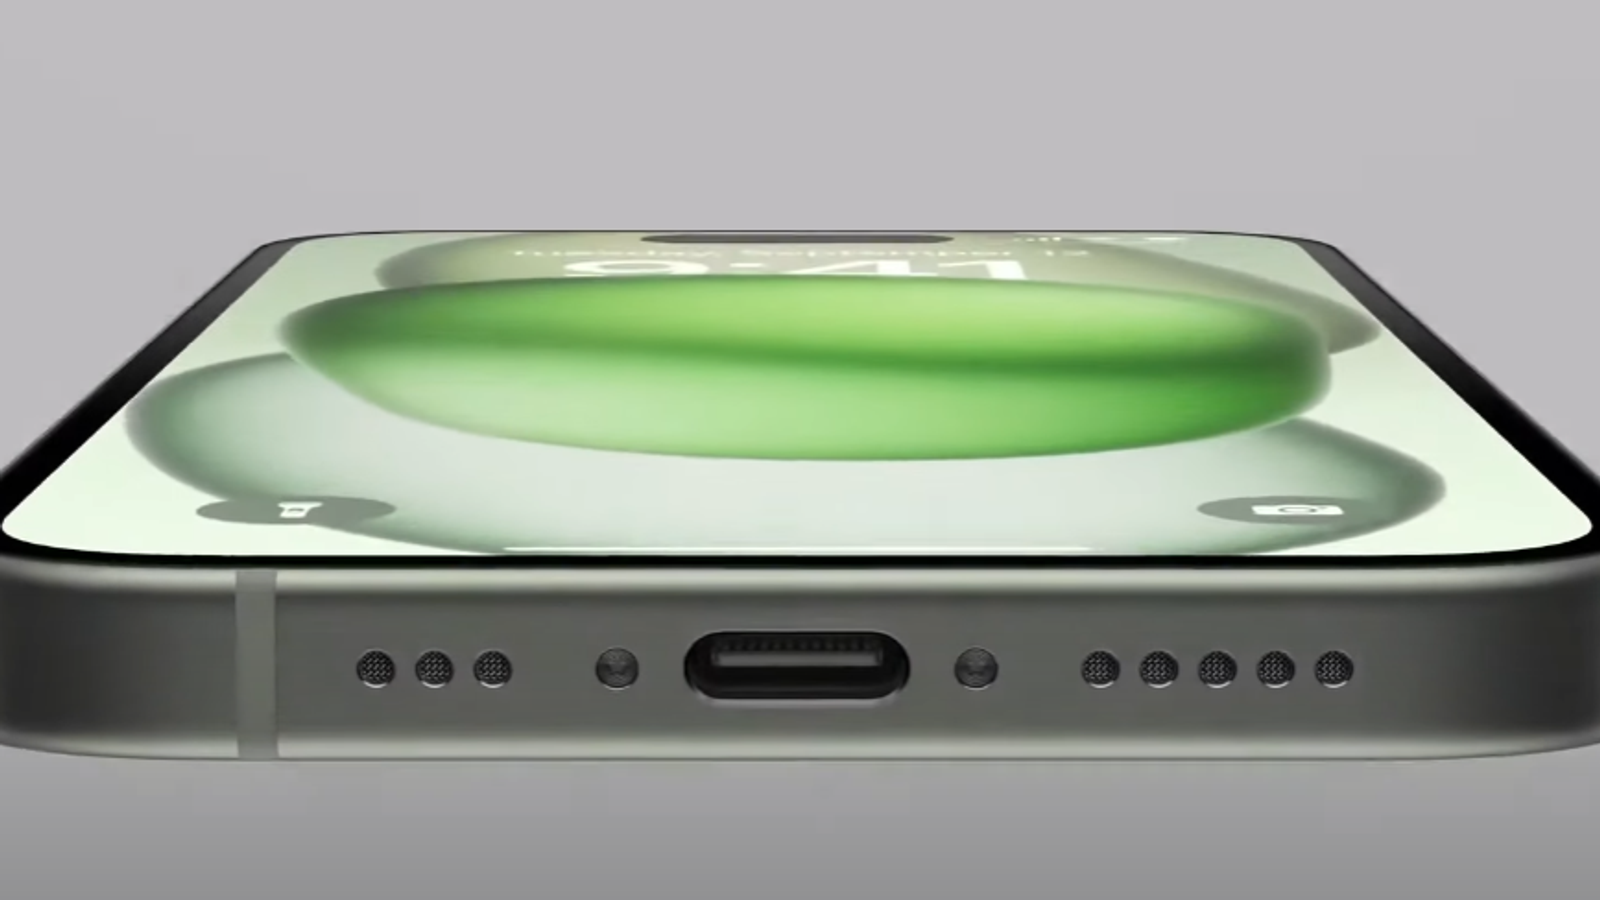 Apple reveals iPhone 15 with USB-C charging port to comply with EU rules